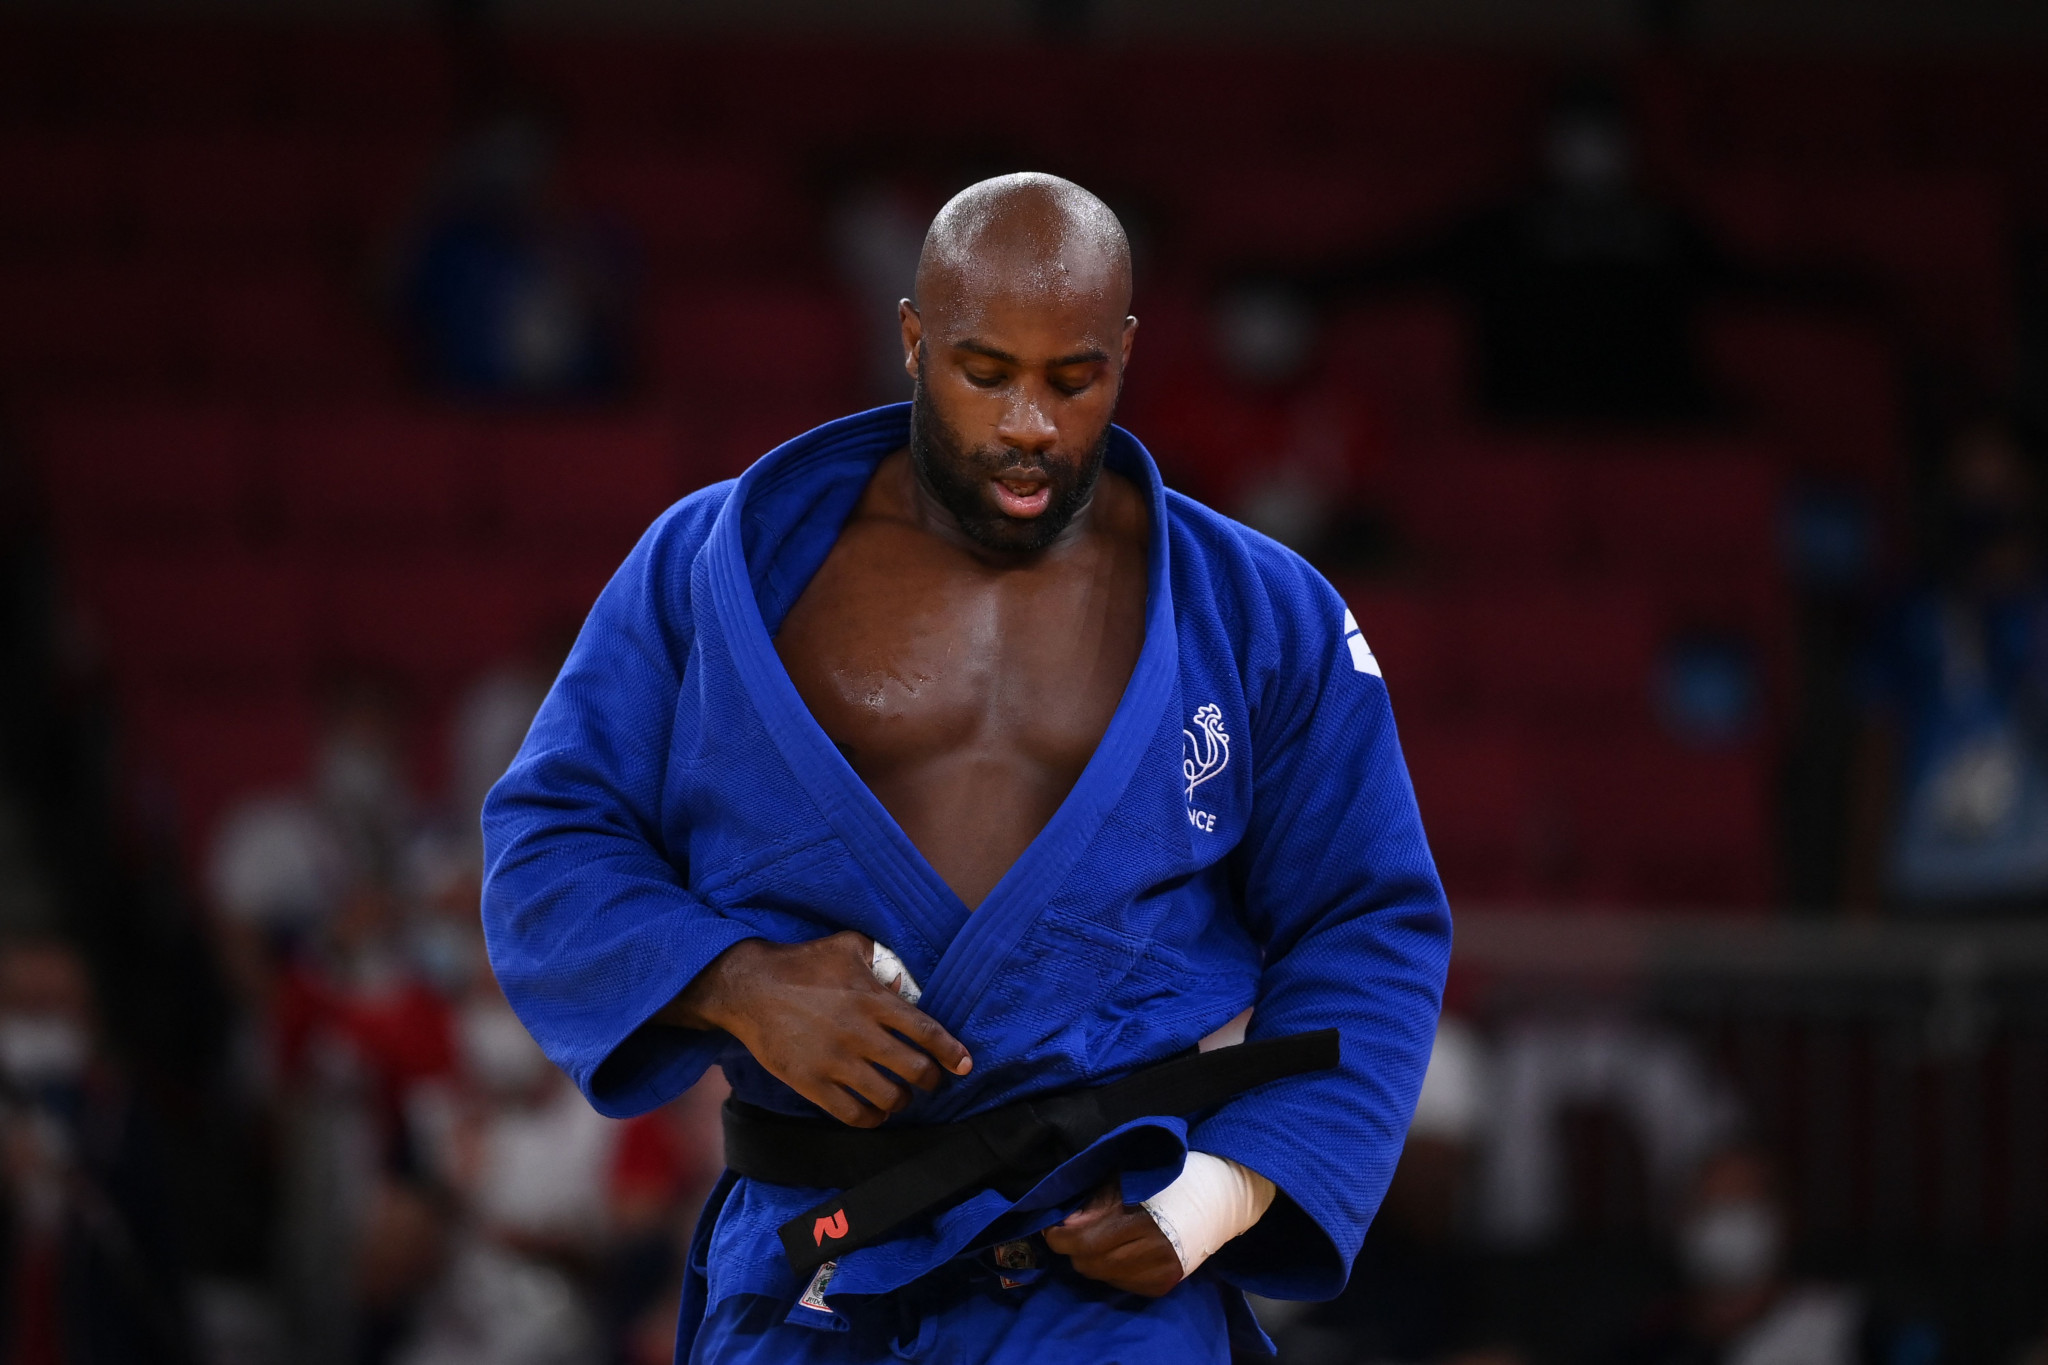 Teddy Riner has returned to training following his injury ©Getty Images